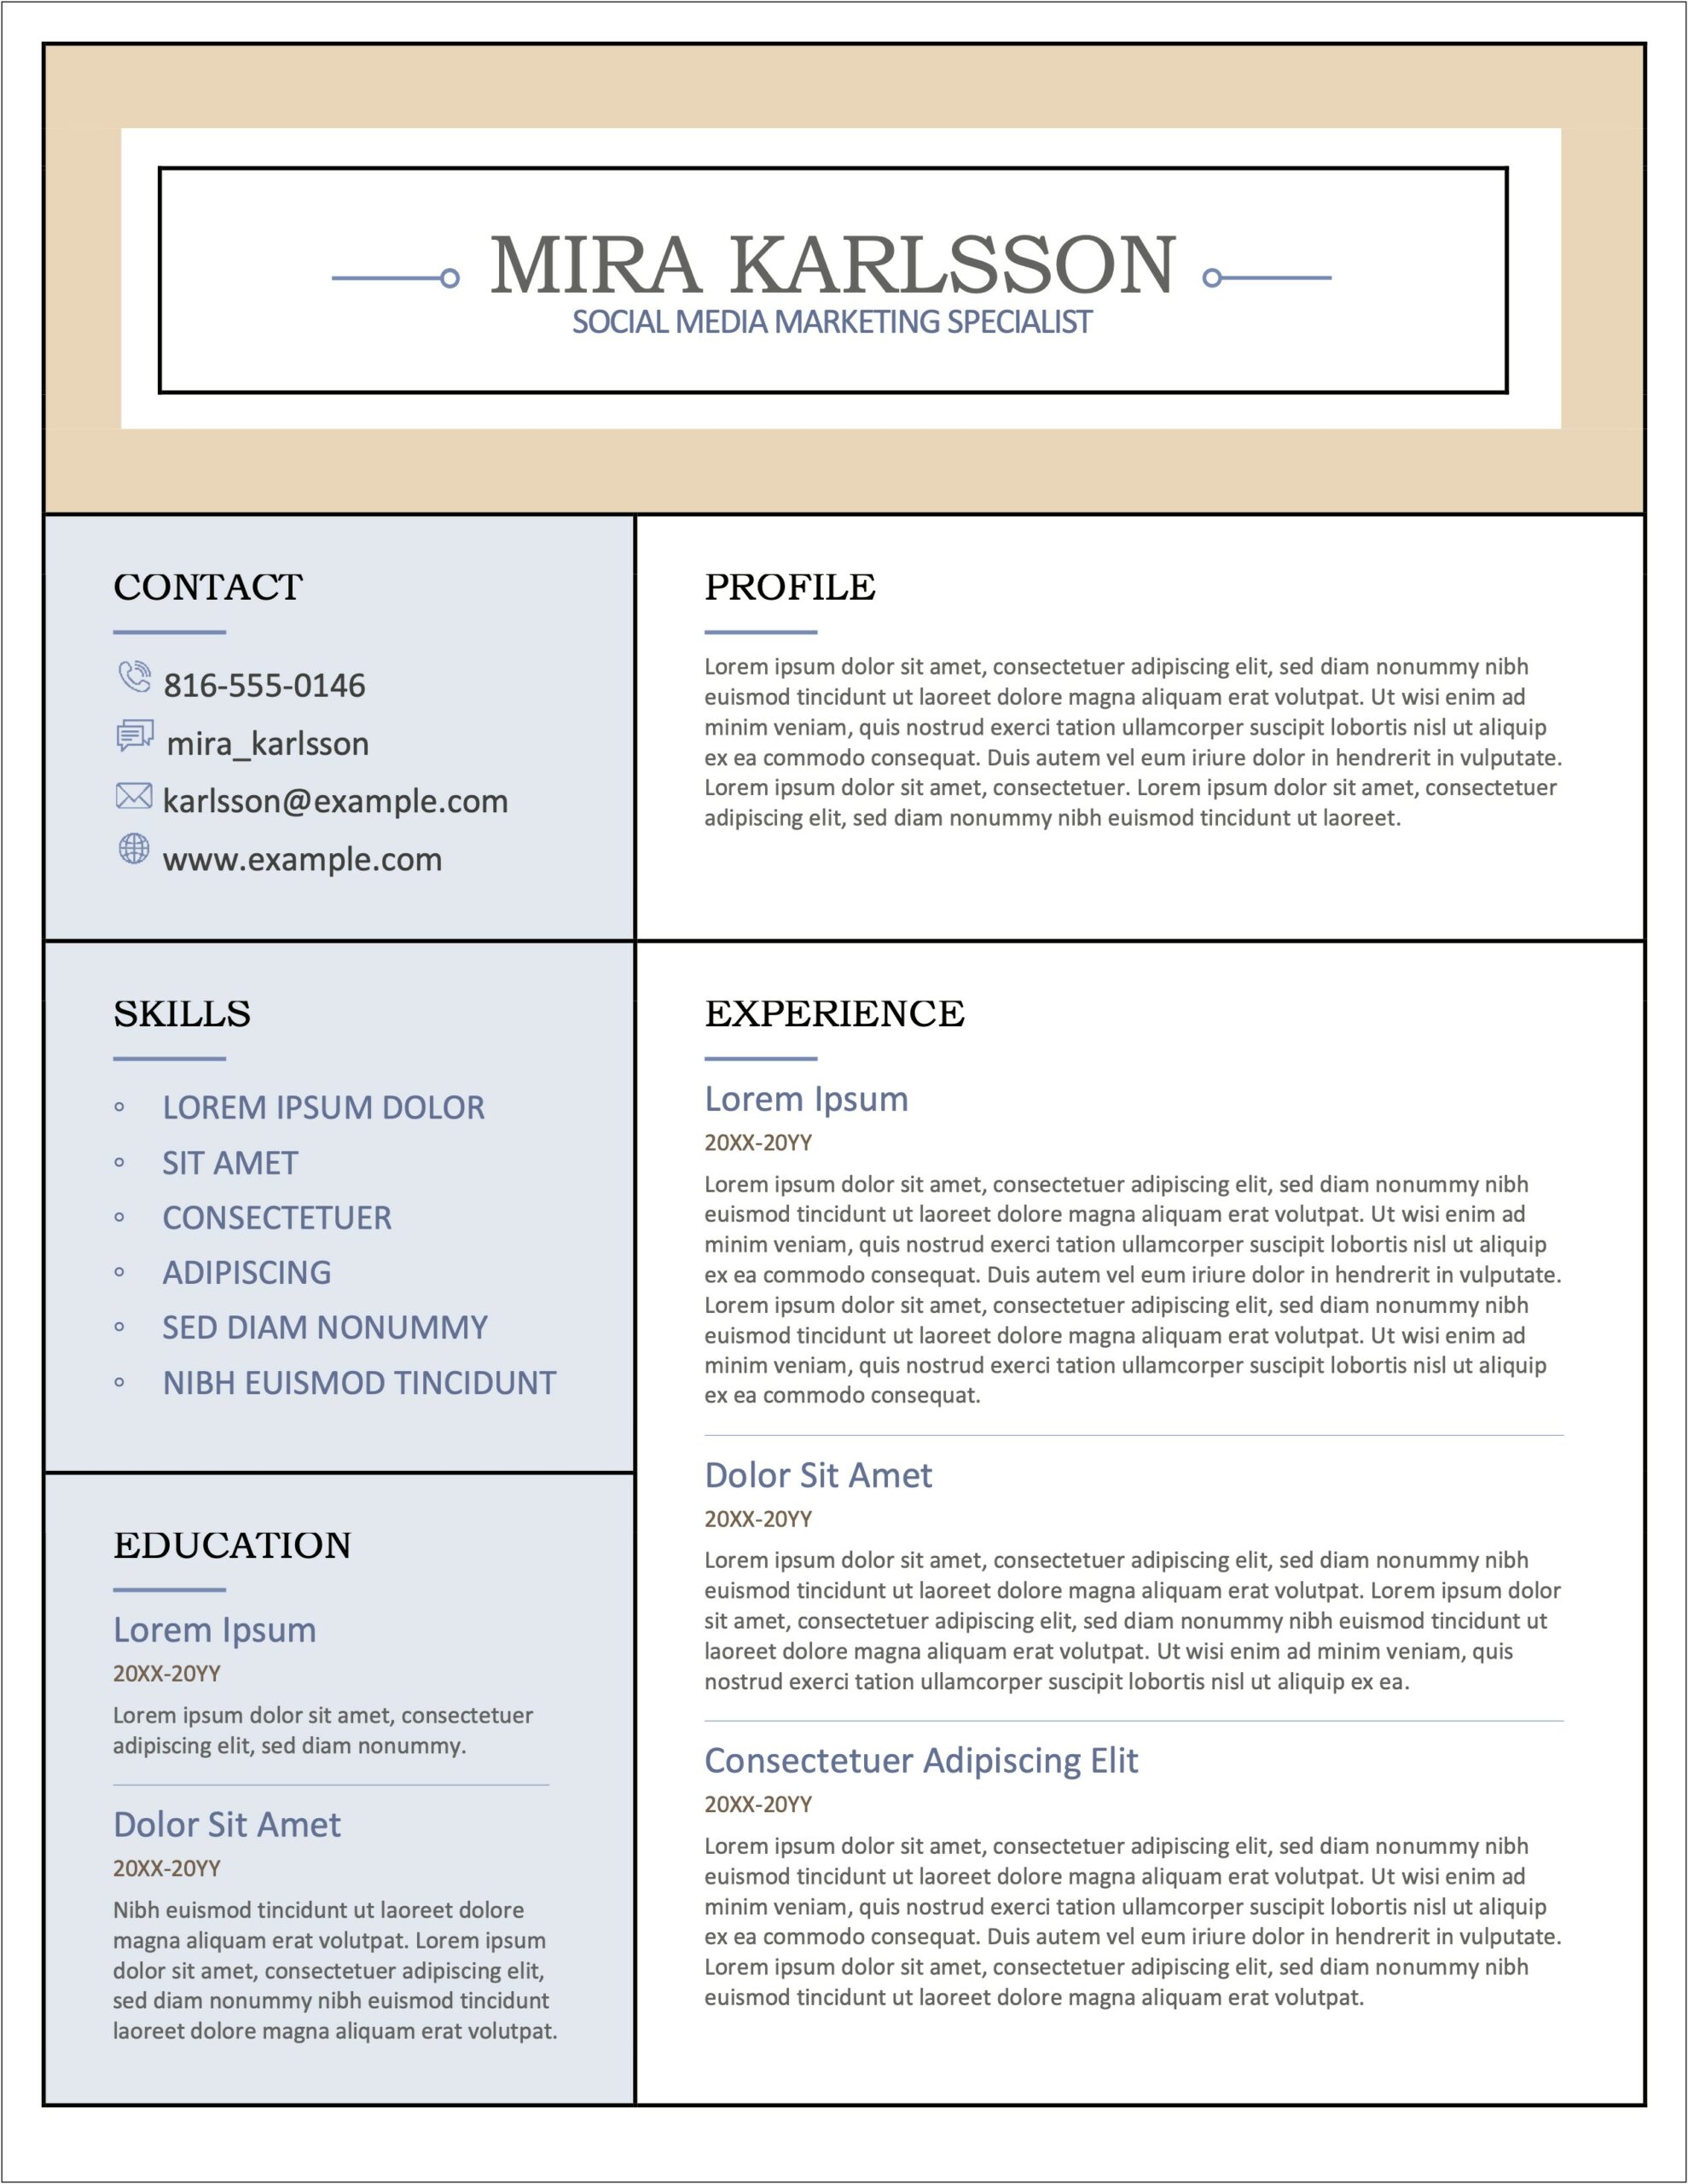 Free Resume Templates 2018 Open Office